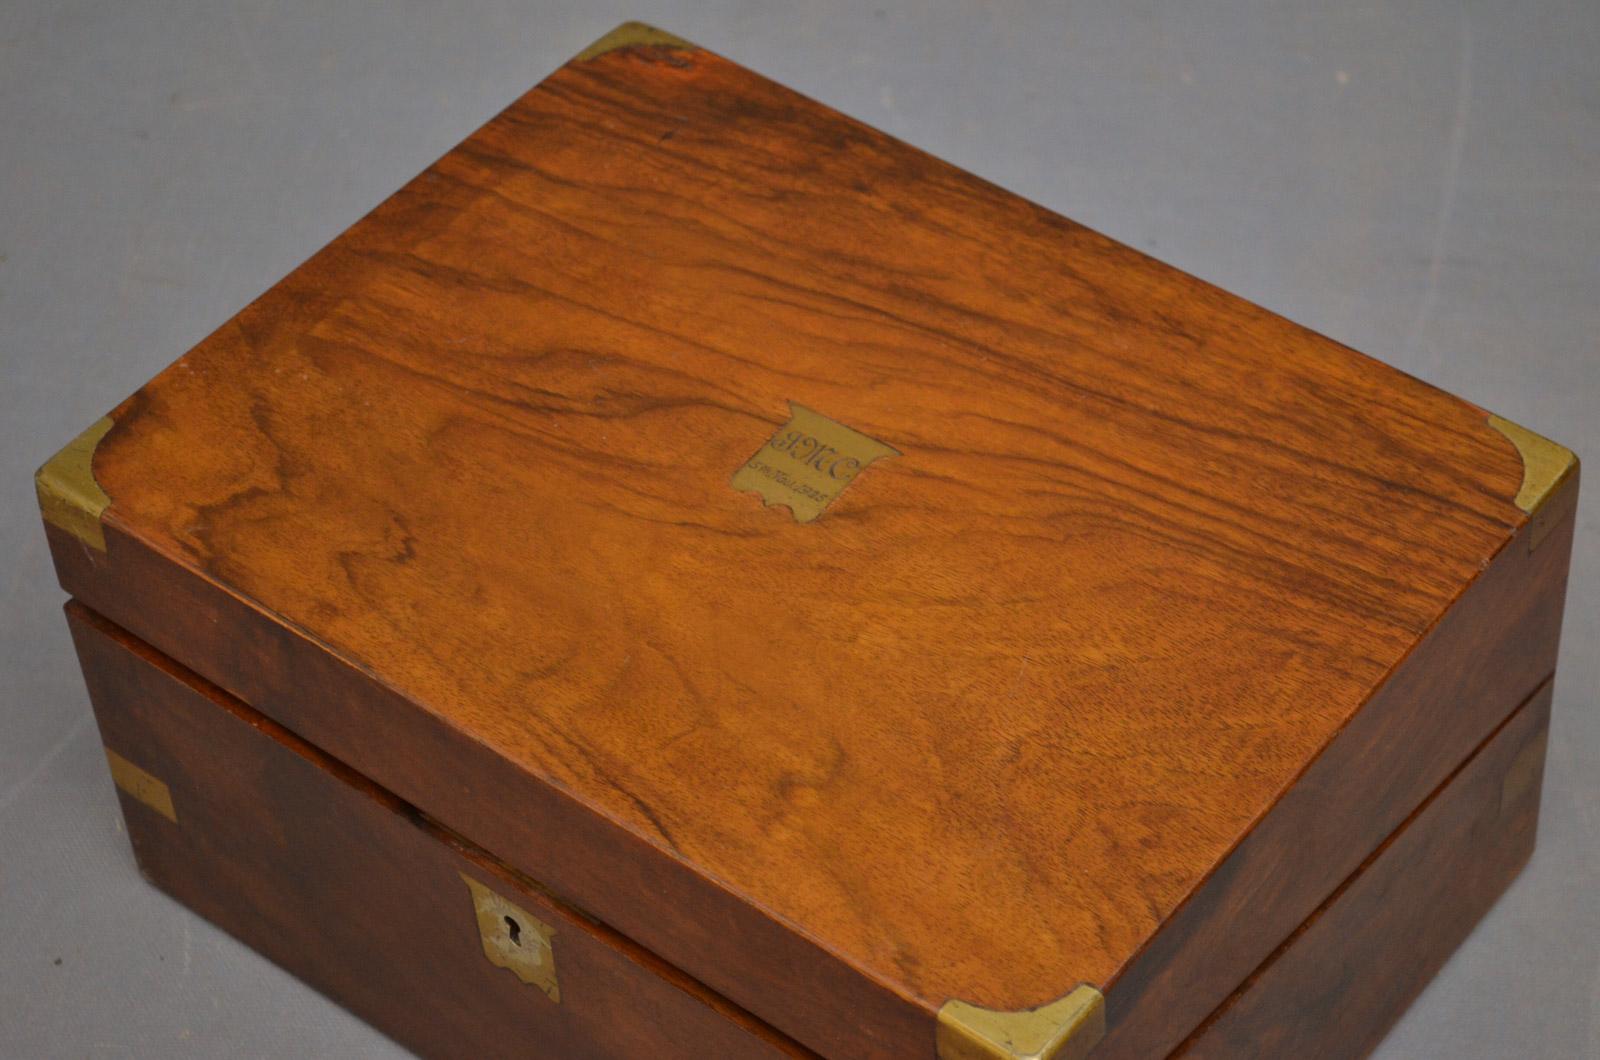 Sn3495, Victorian walnut writing slope with brass corners, hinged lid enclosing hazel, tooled leather writing surface, inkwell and pen tray, all in wonderful condition throughout, ready to place at home, circa 1870
Measures: H 6